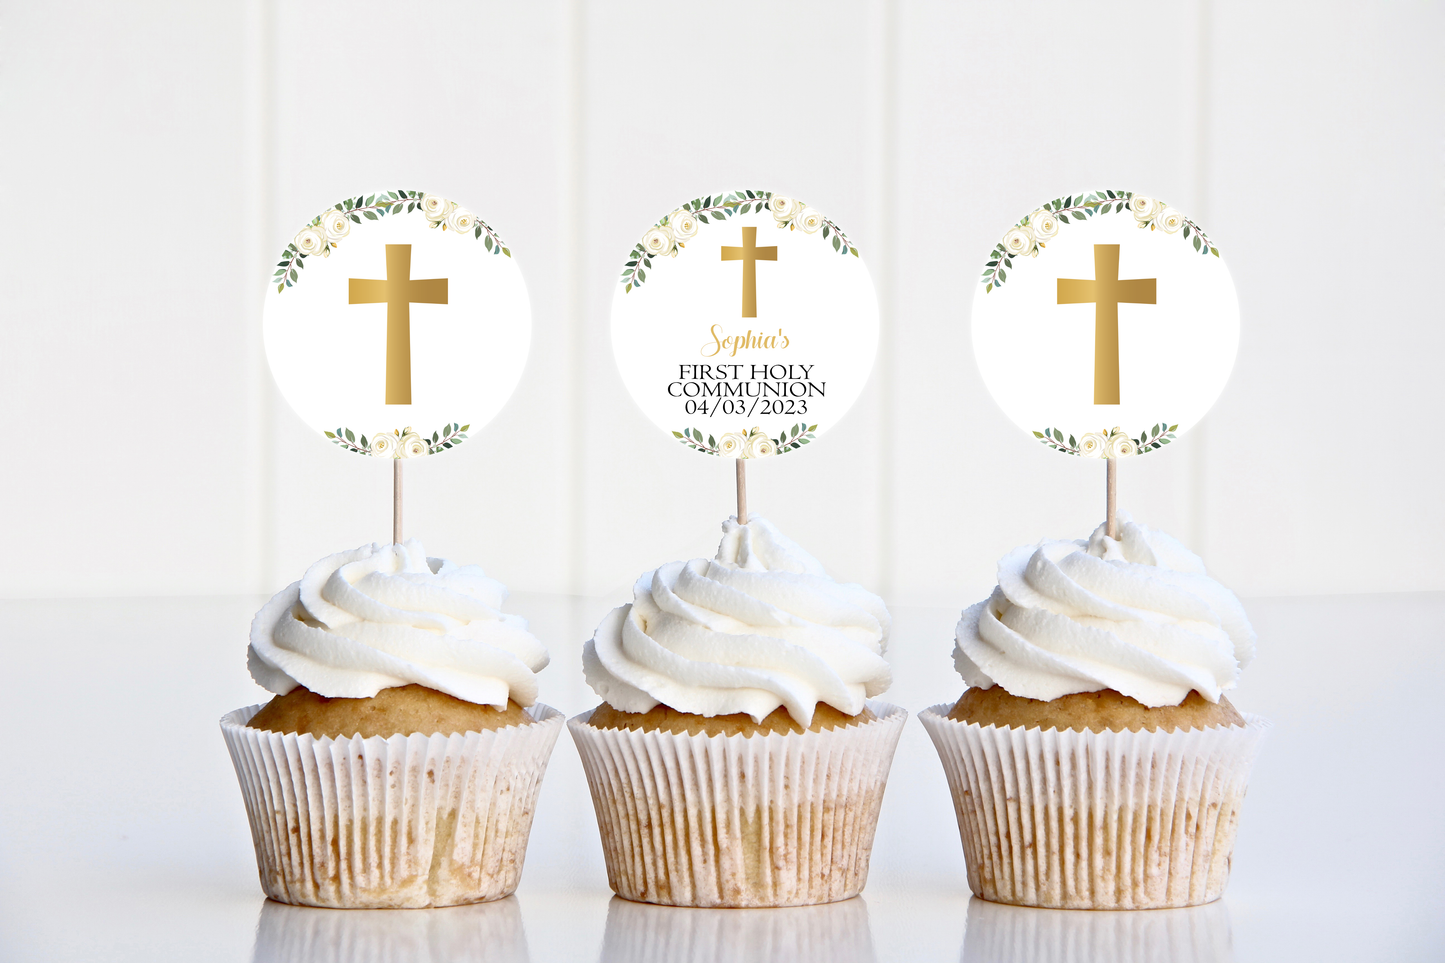 12 x Personalised Cupcake Toppers First Holy Communion